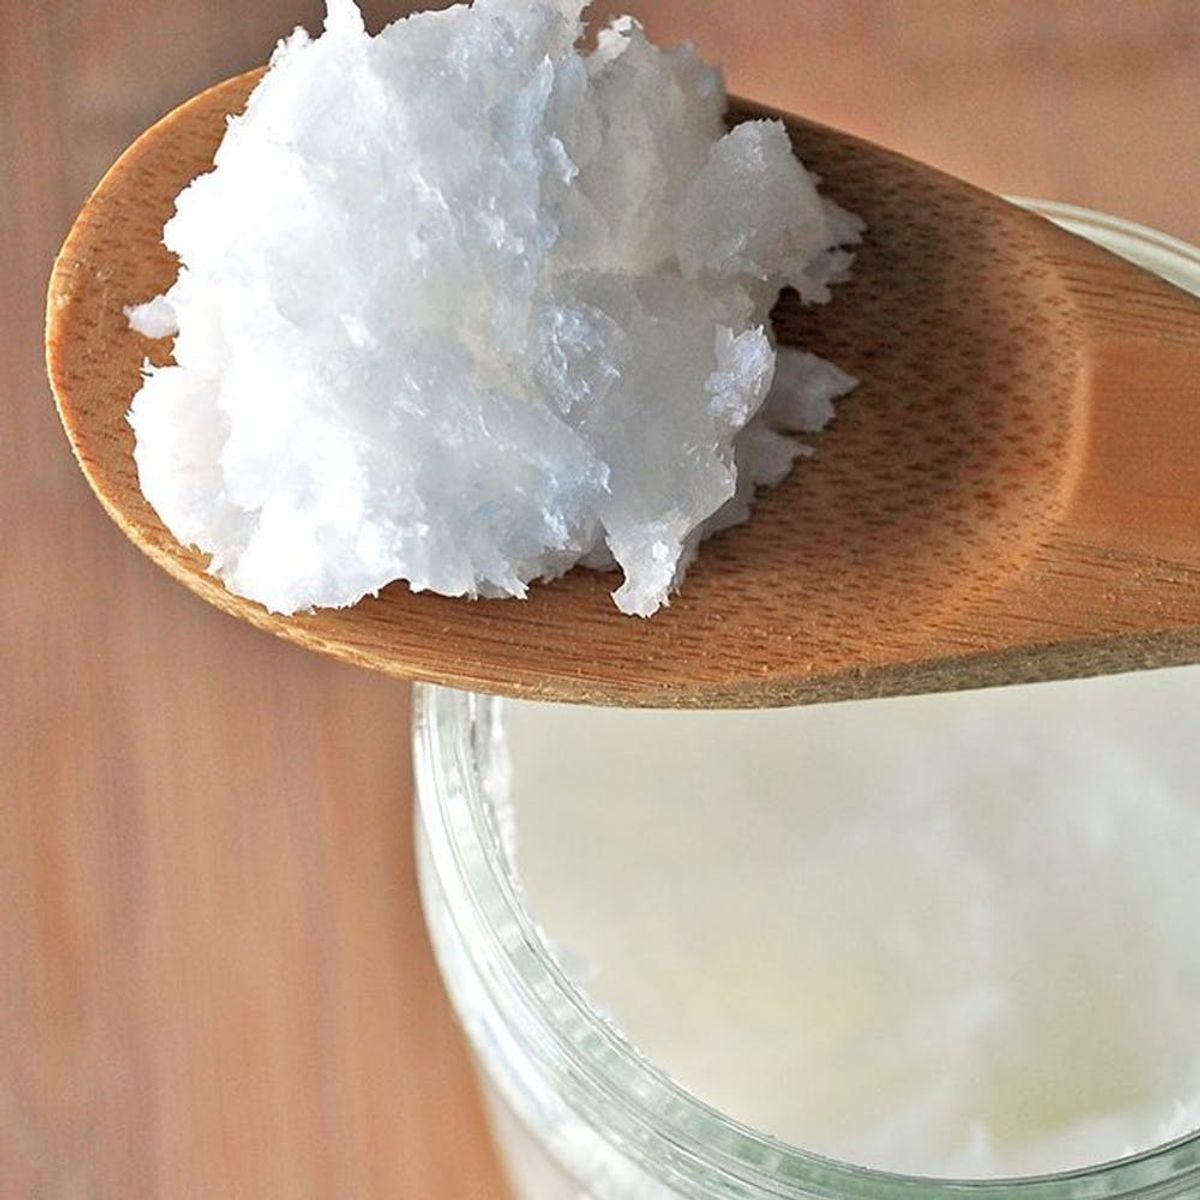 Coconut Oil Is Not the Superfood We Thought It Was, Study Says